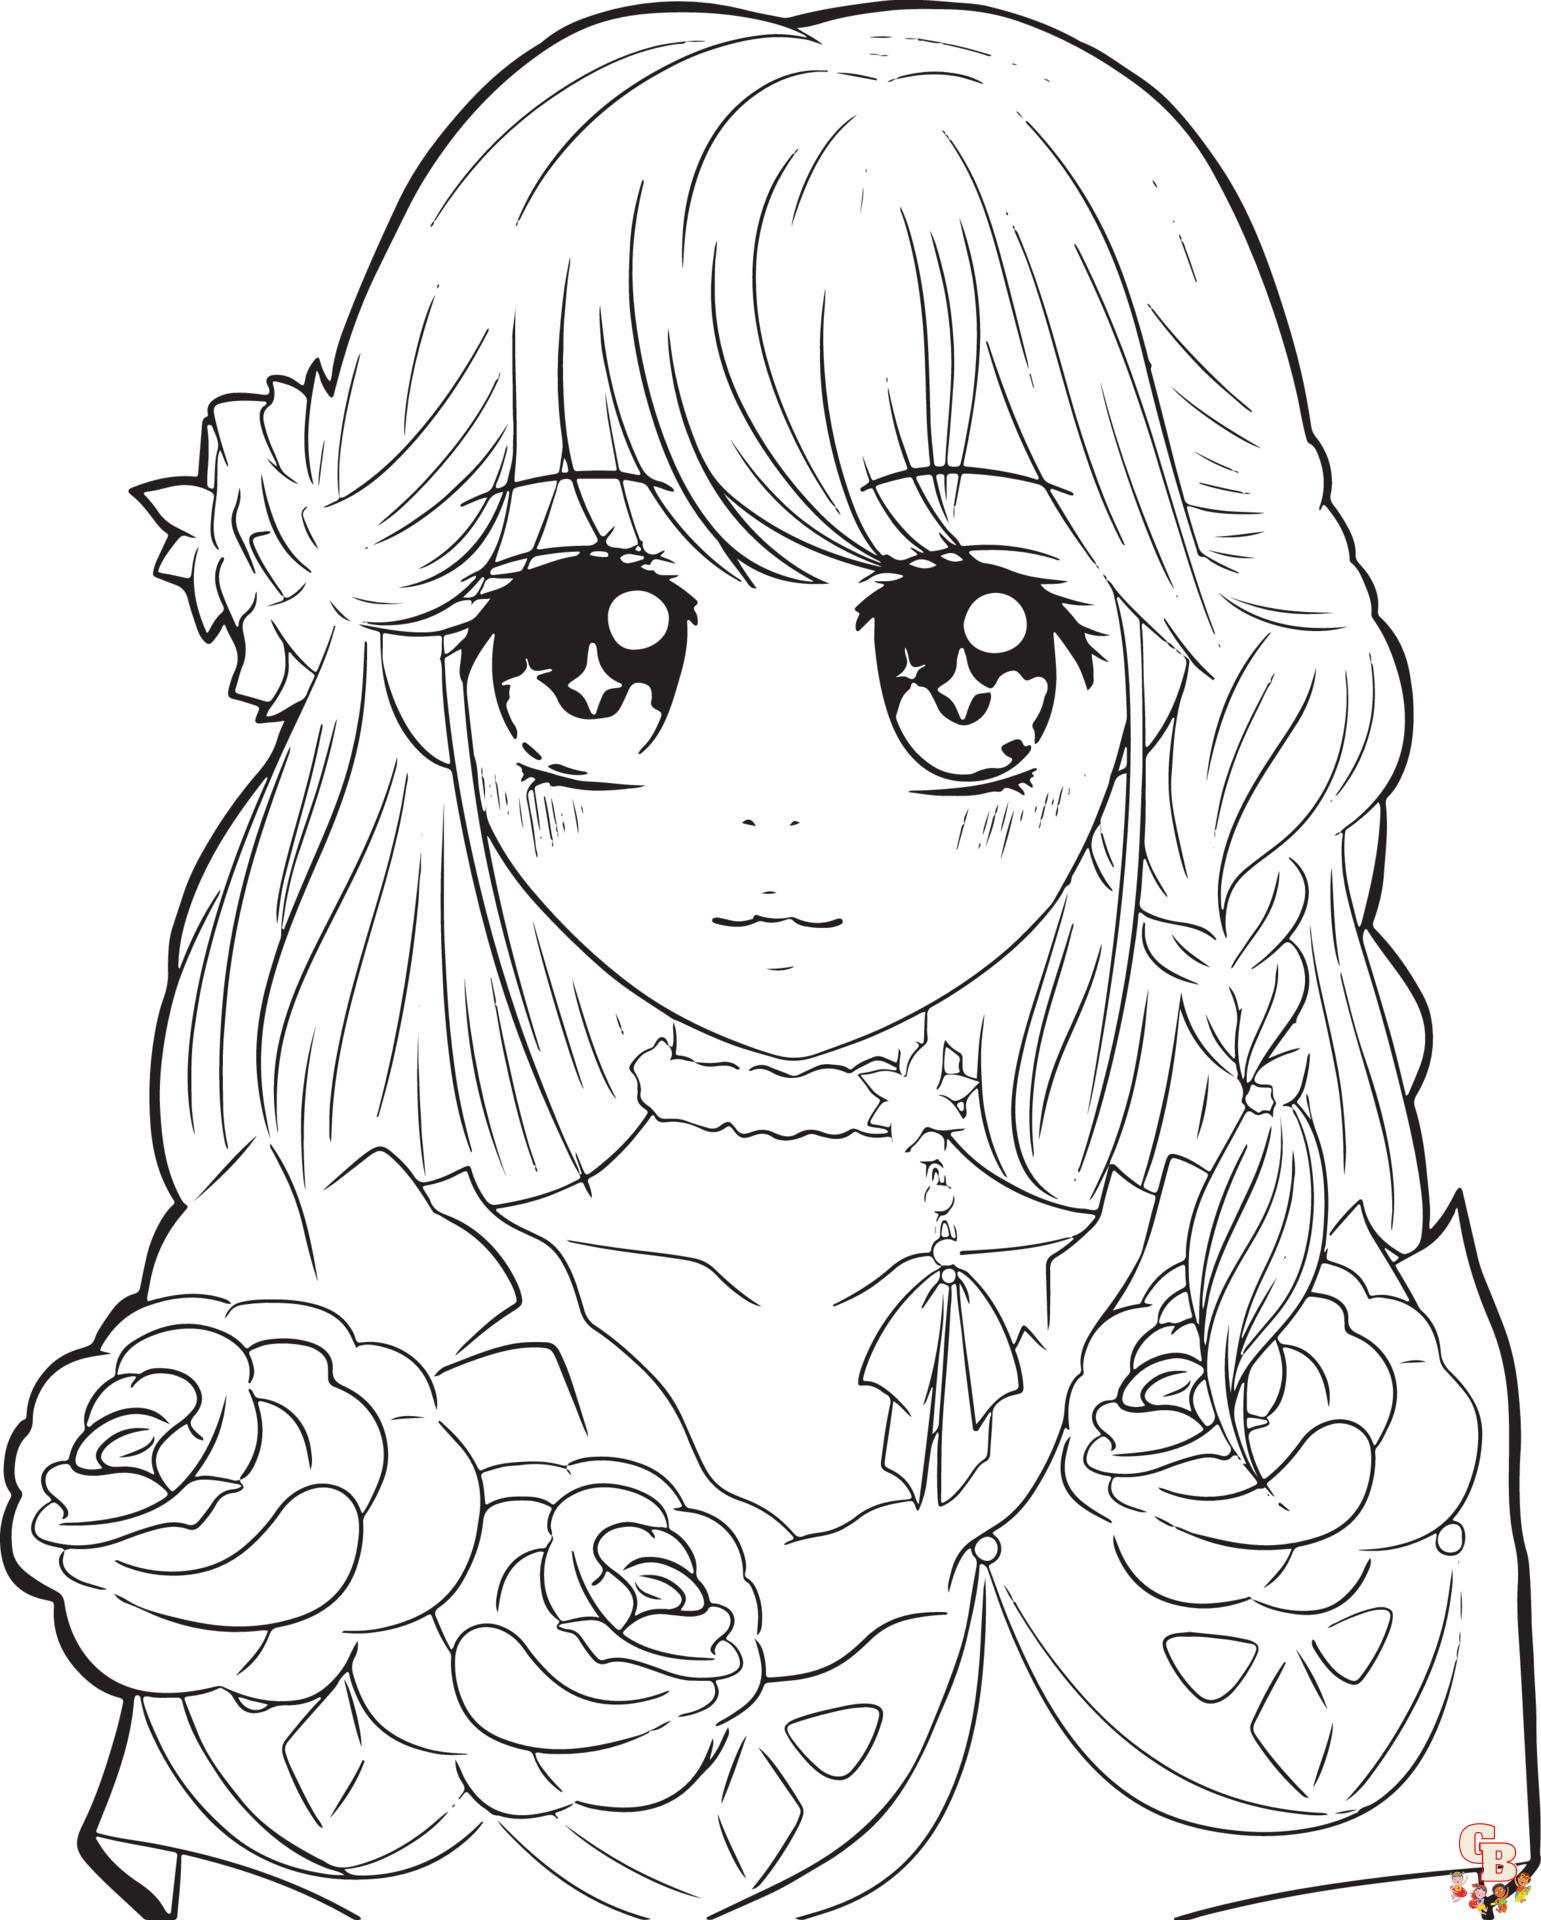 900+ Anime coloring pages! ideas in 2023 | coloring pages, coloring books,  colouring pages